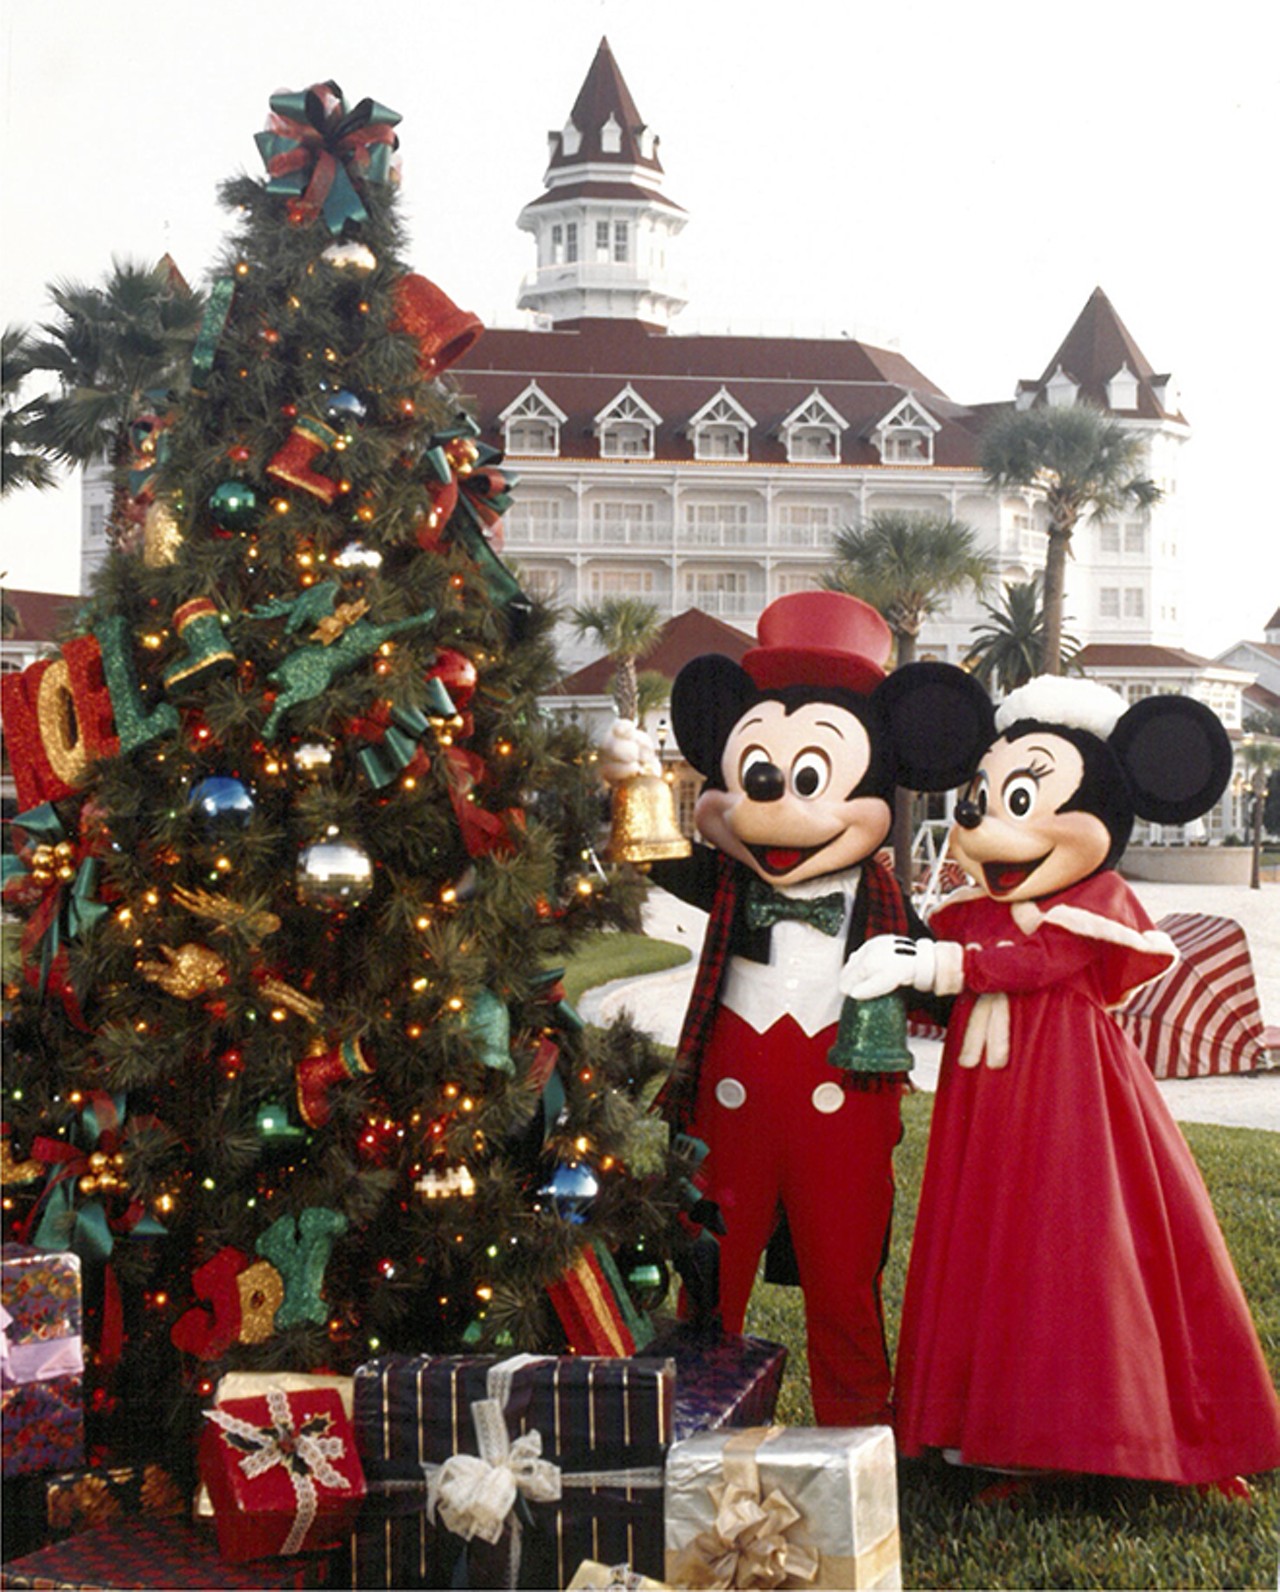 A promotional shot for Holiday's at Disney. 1996.